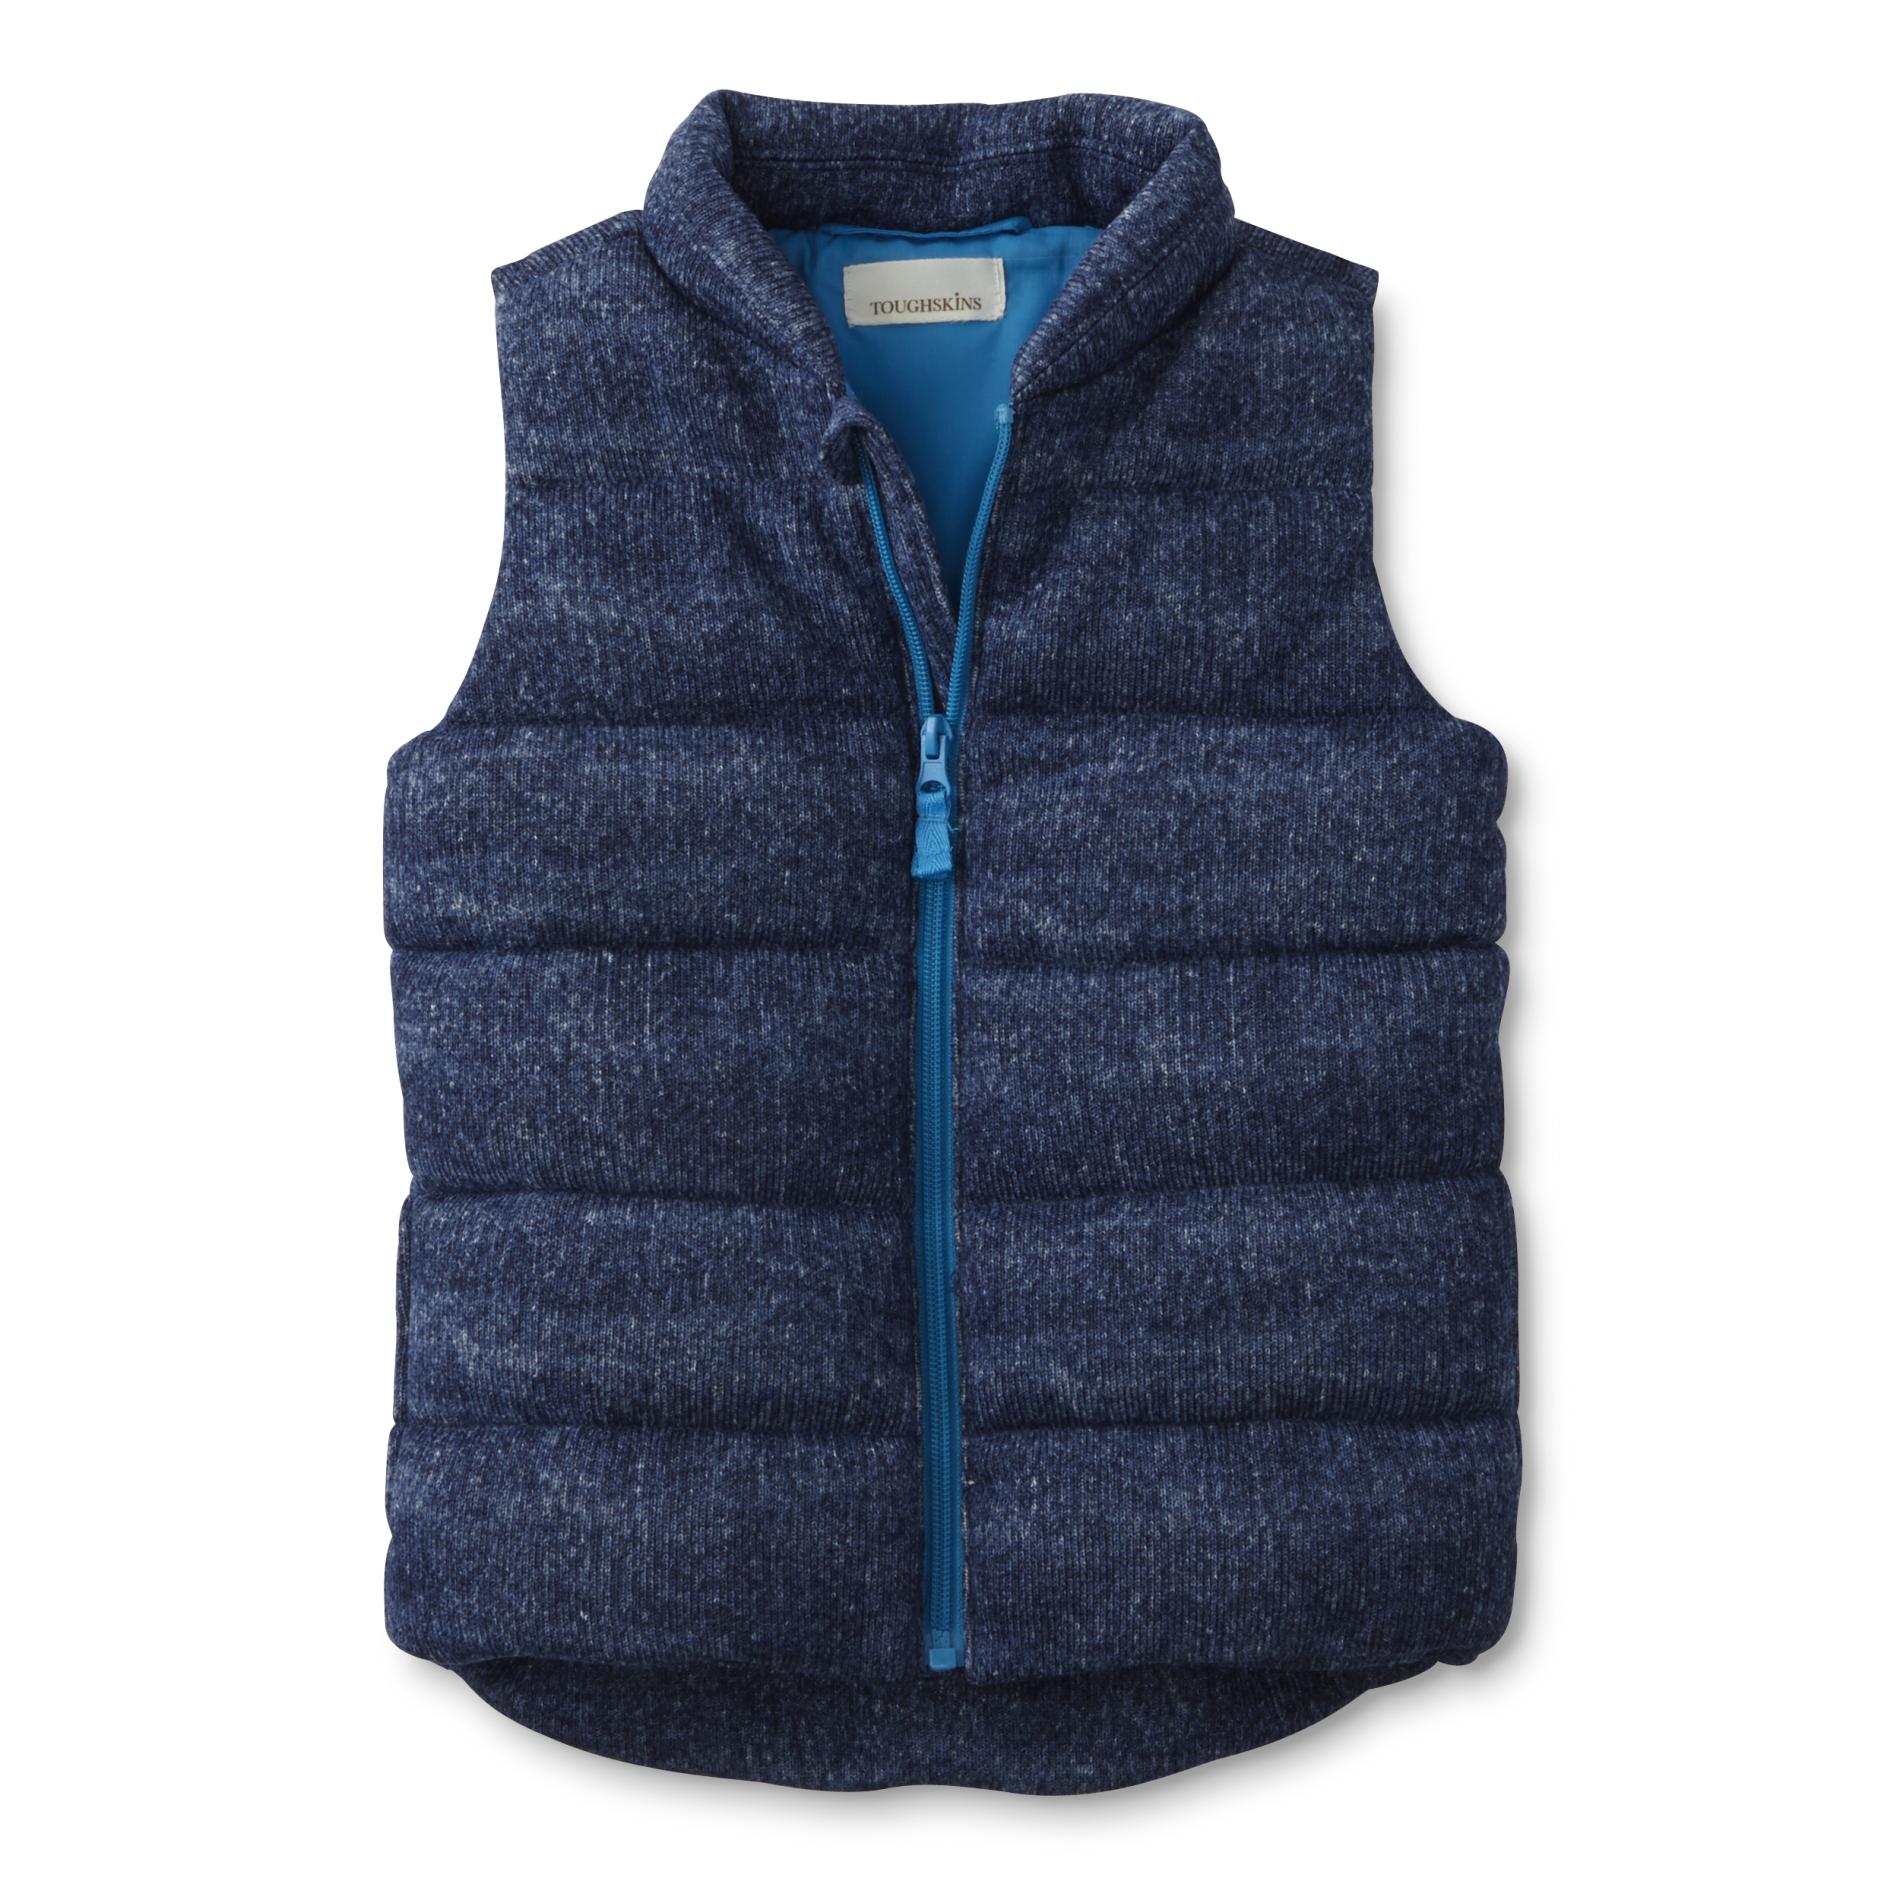 Toughskins Infant & Toddler Boys' Quilted Puffer Vest